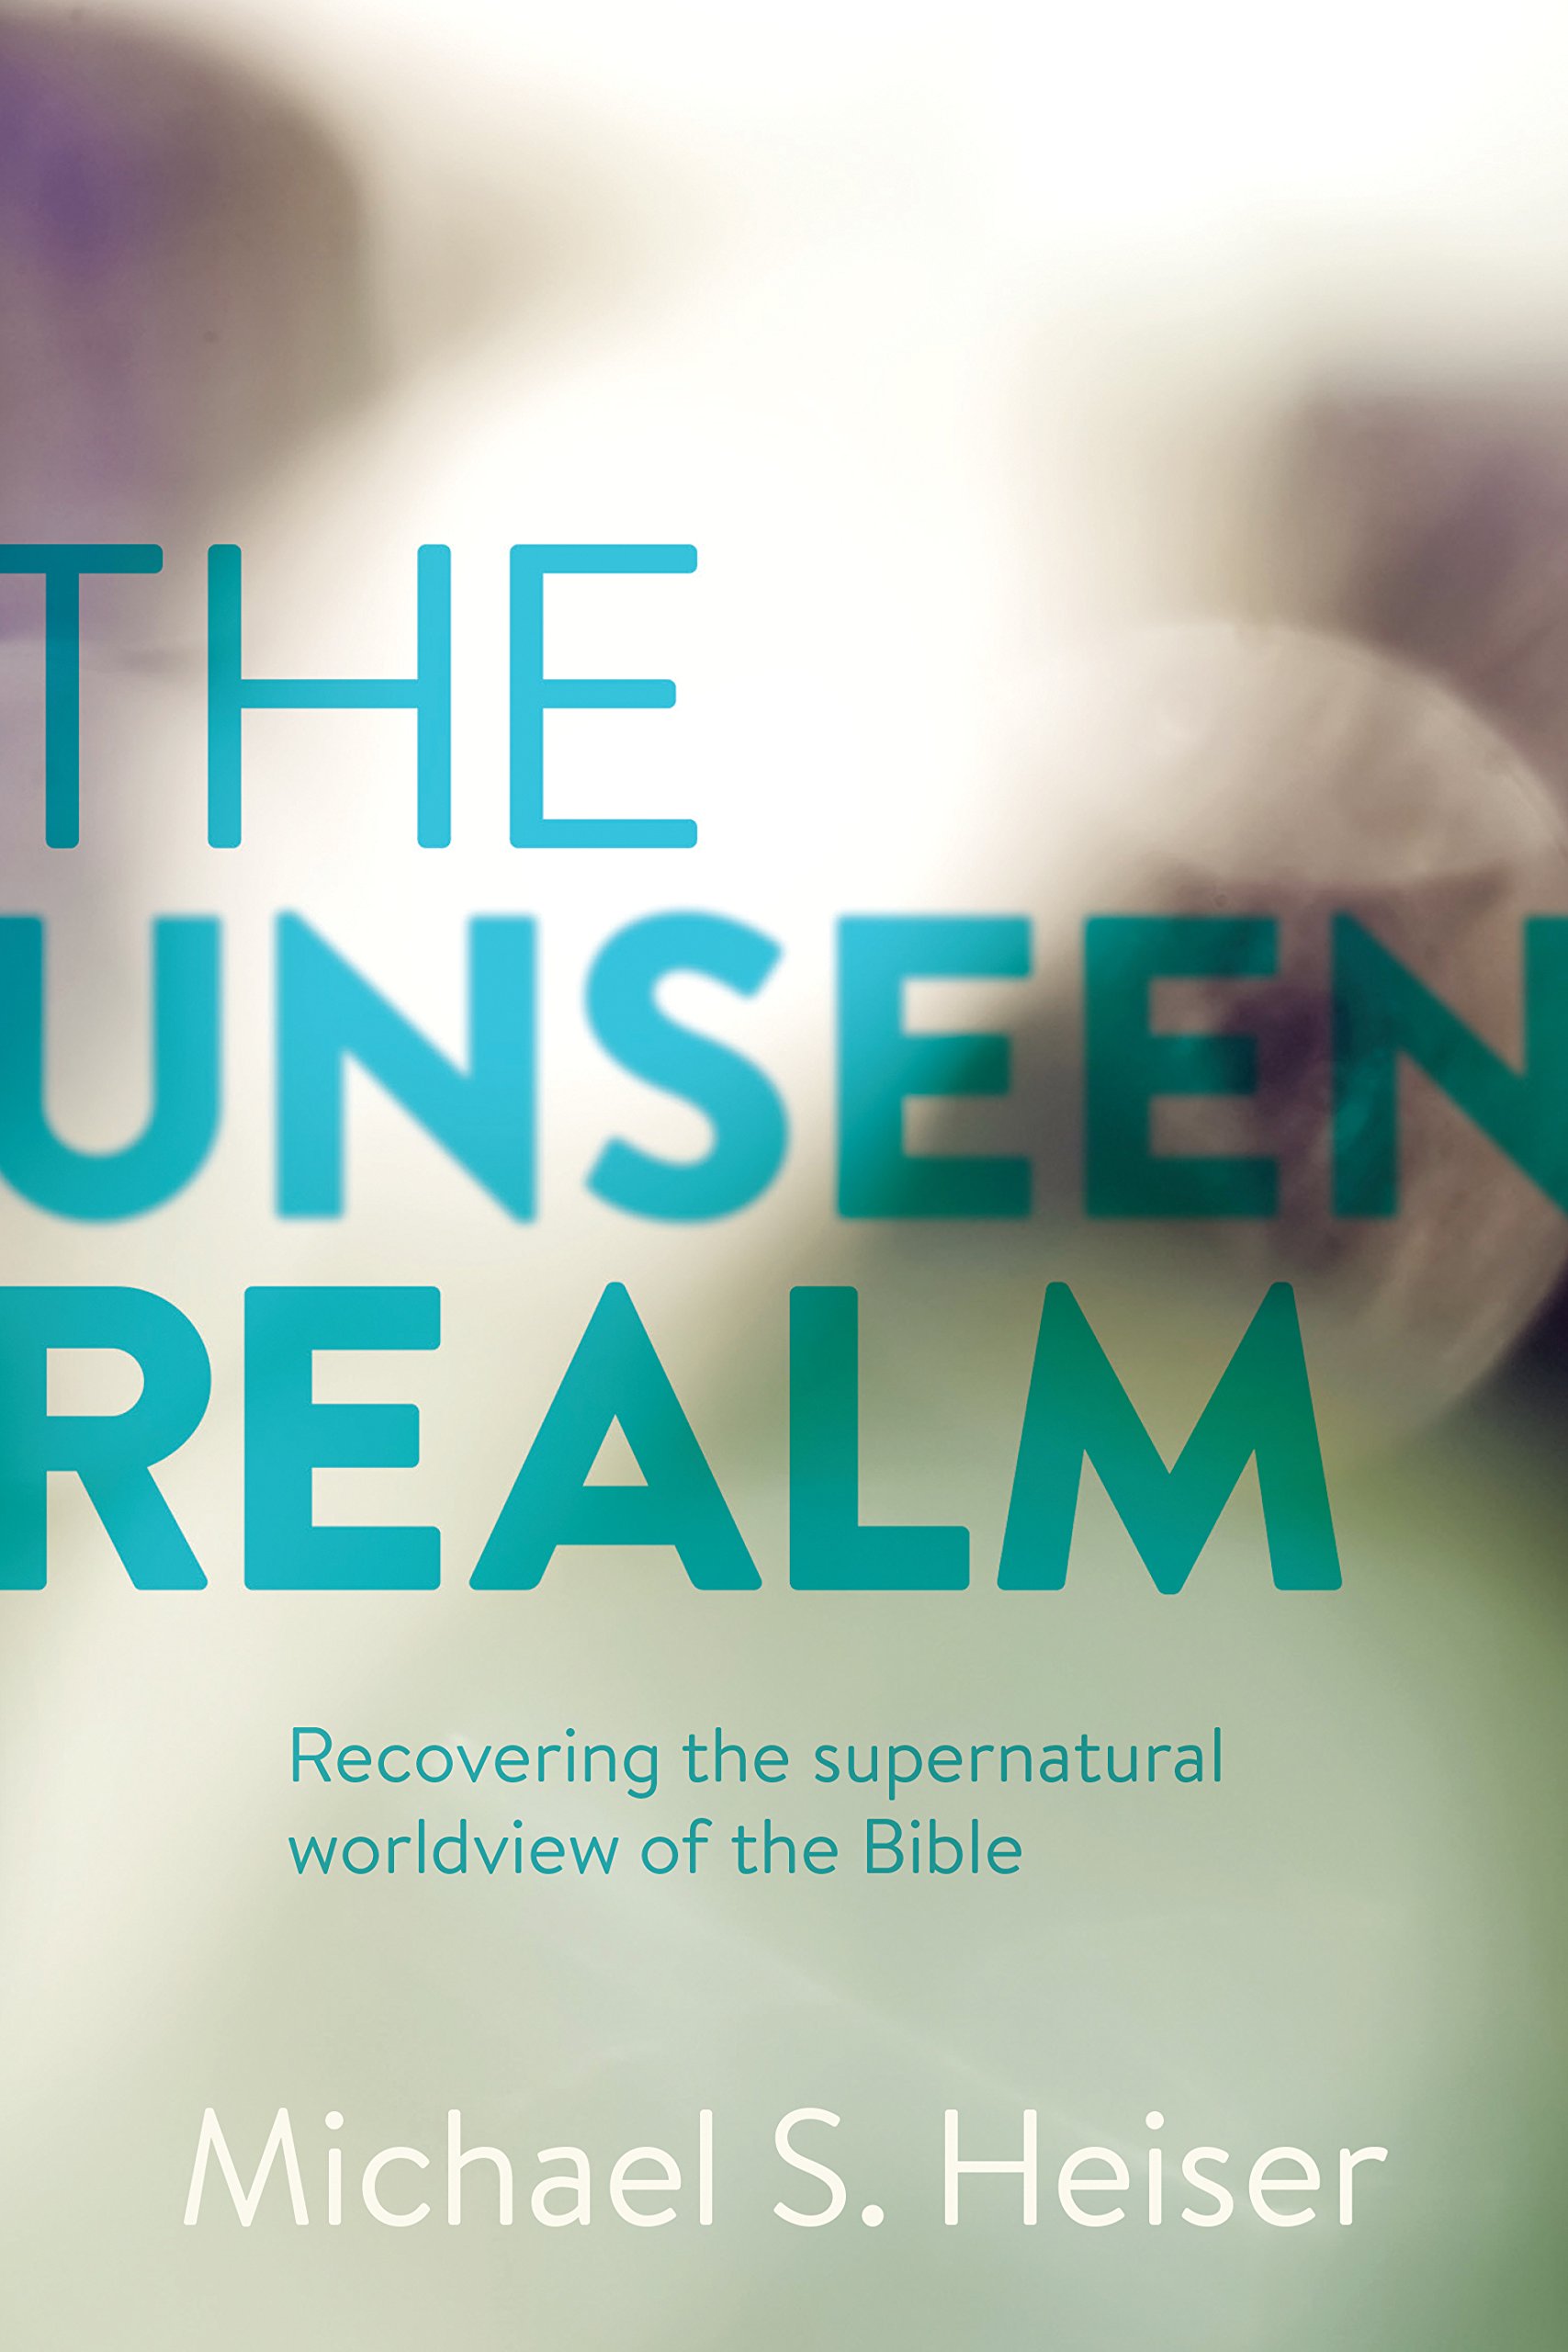 THE UNSEEN REALM: RECOVERING THE SUPERNATURAL WORLDVIEW OF THE BIBLE, by Michael S. Heiser